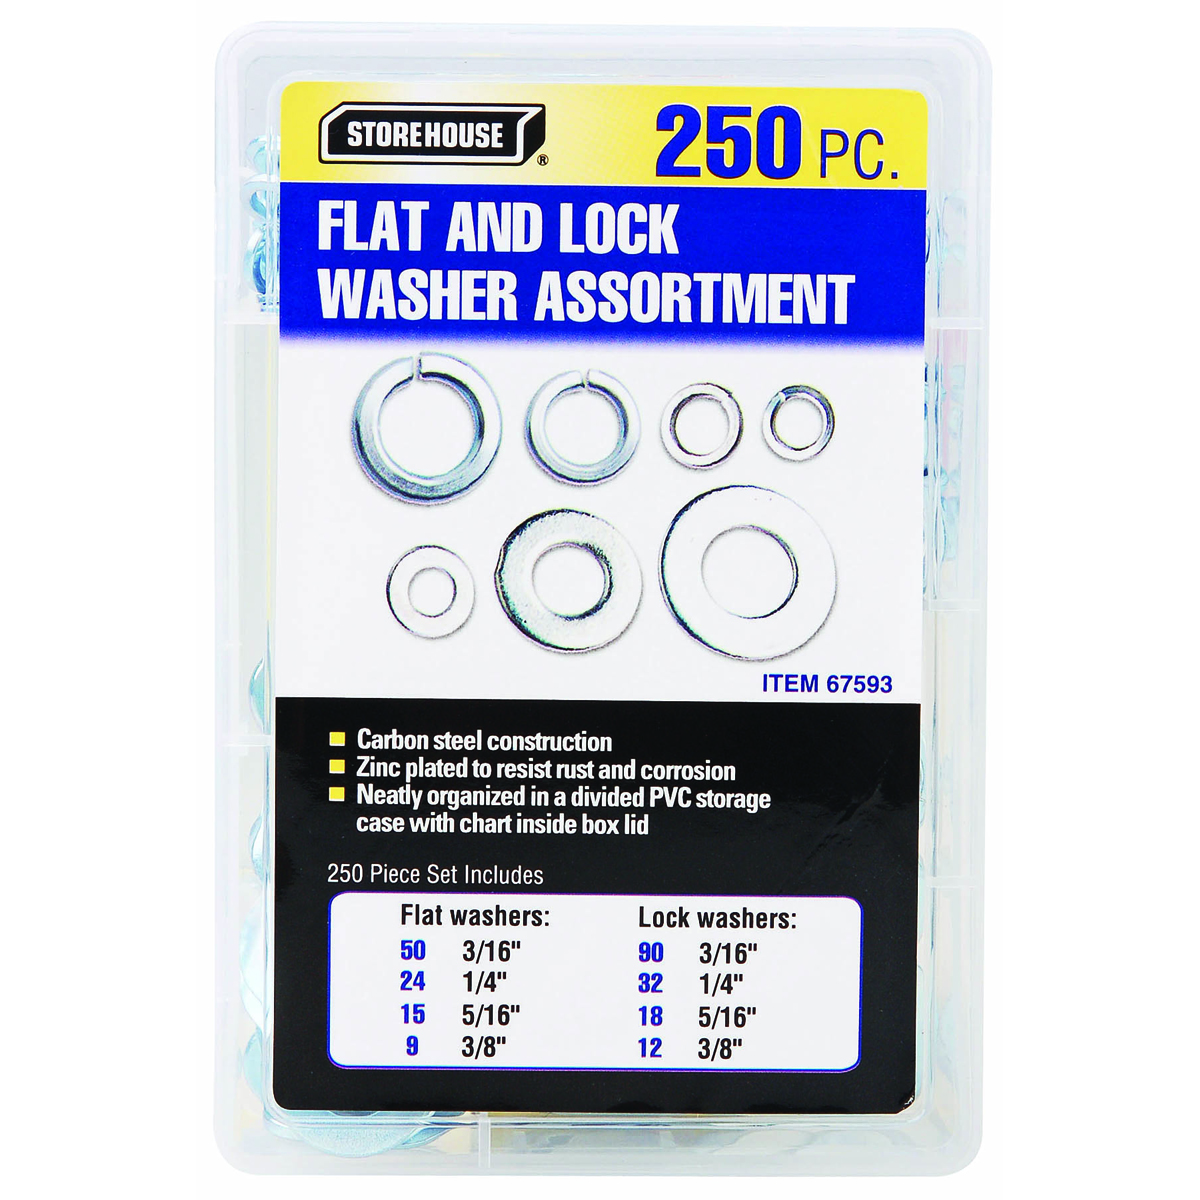 STOREHOUSE 250 Piece Flat and Lock Washers - Item 67593